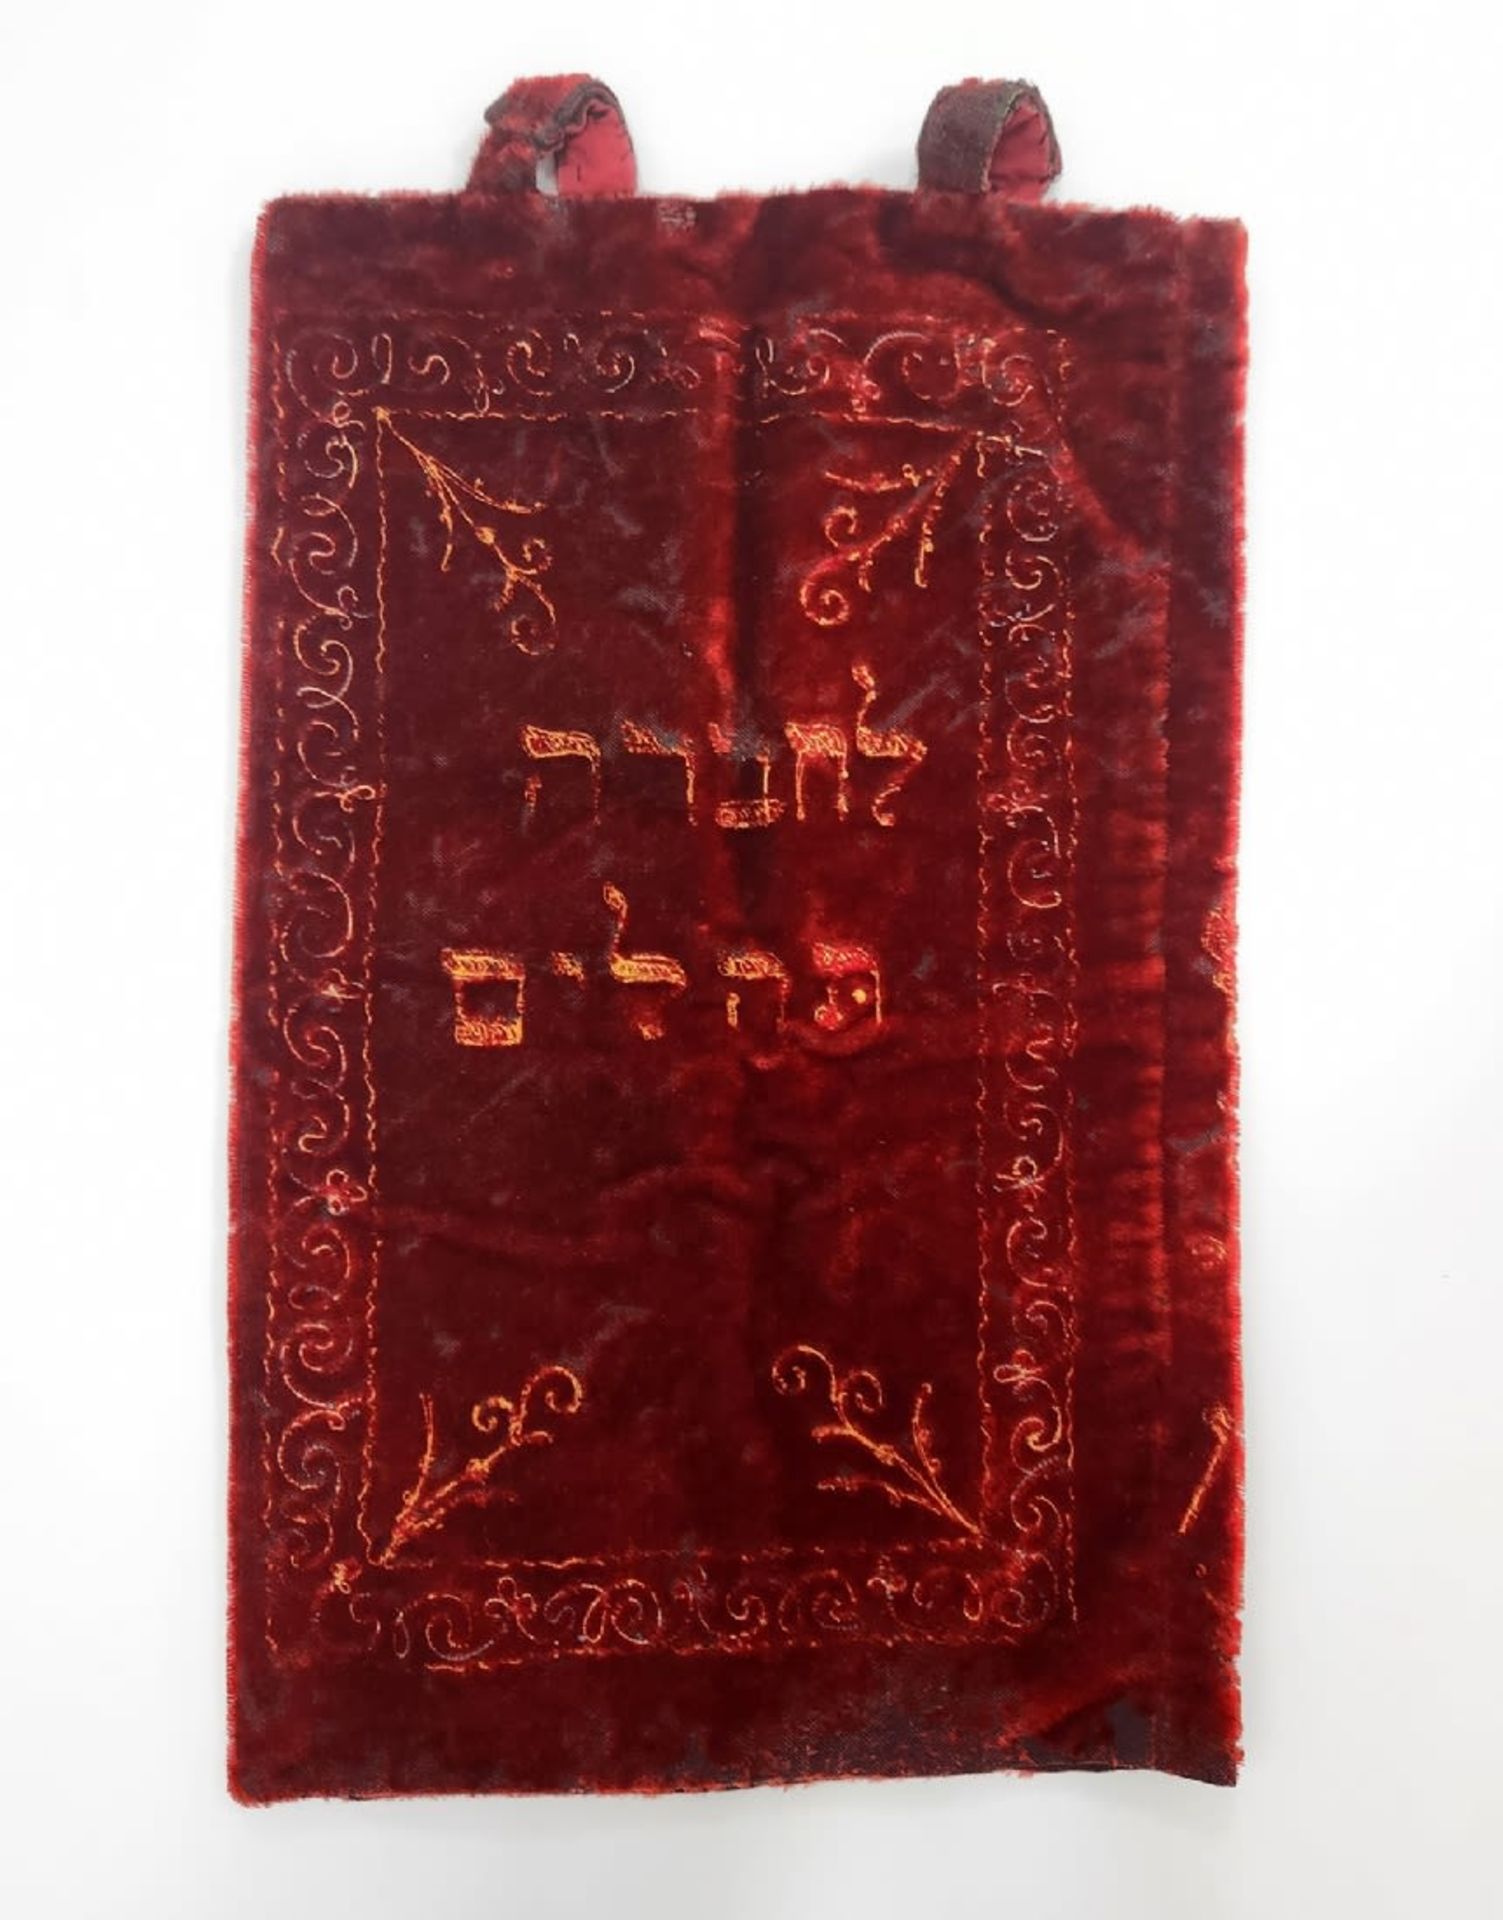 A Torah scroll coat, embroidered with cotton threads on red velvet, dating from 1929, the subject of - Image 2 of 4